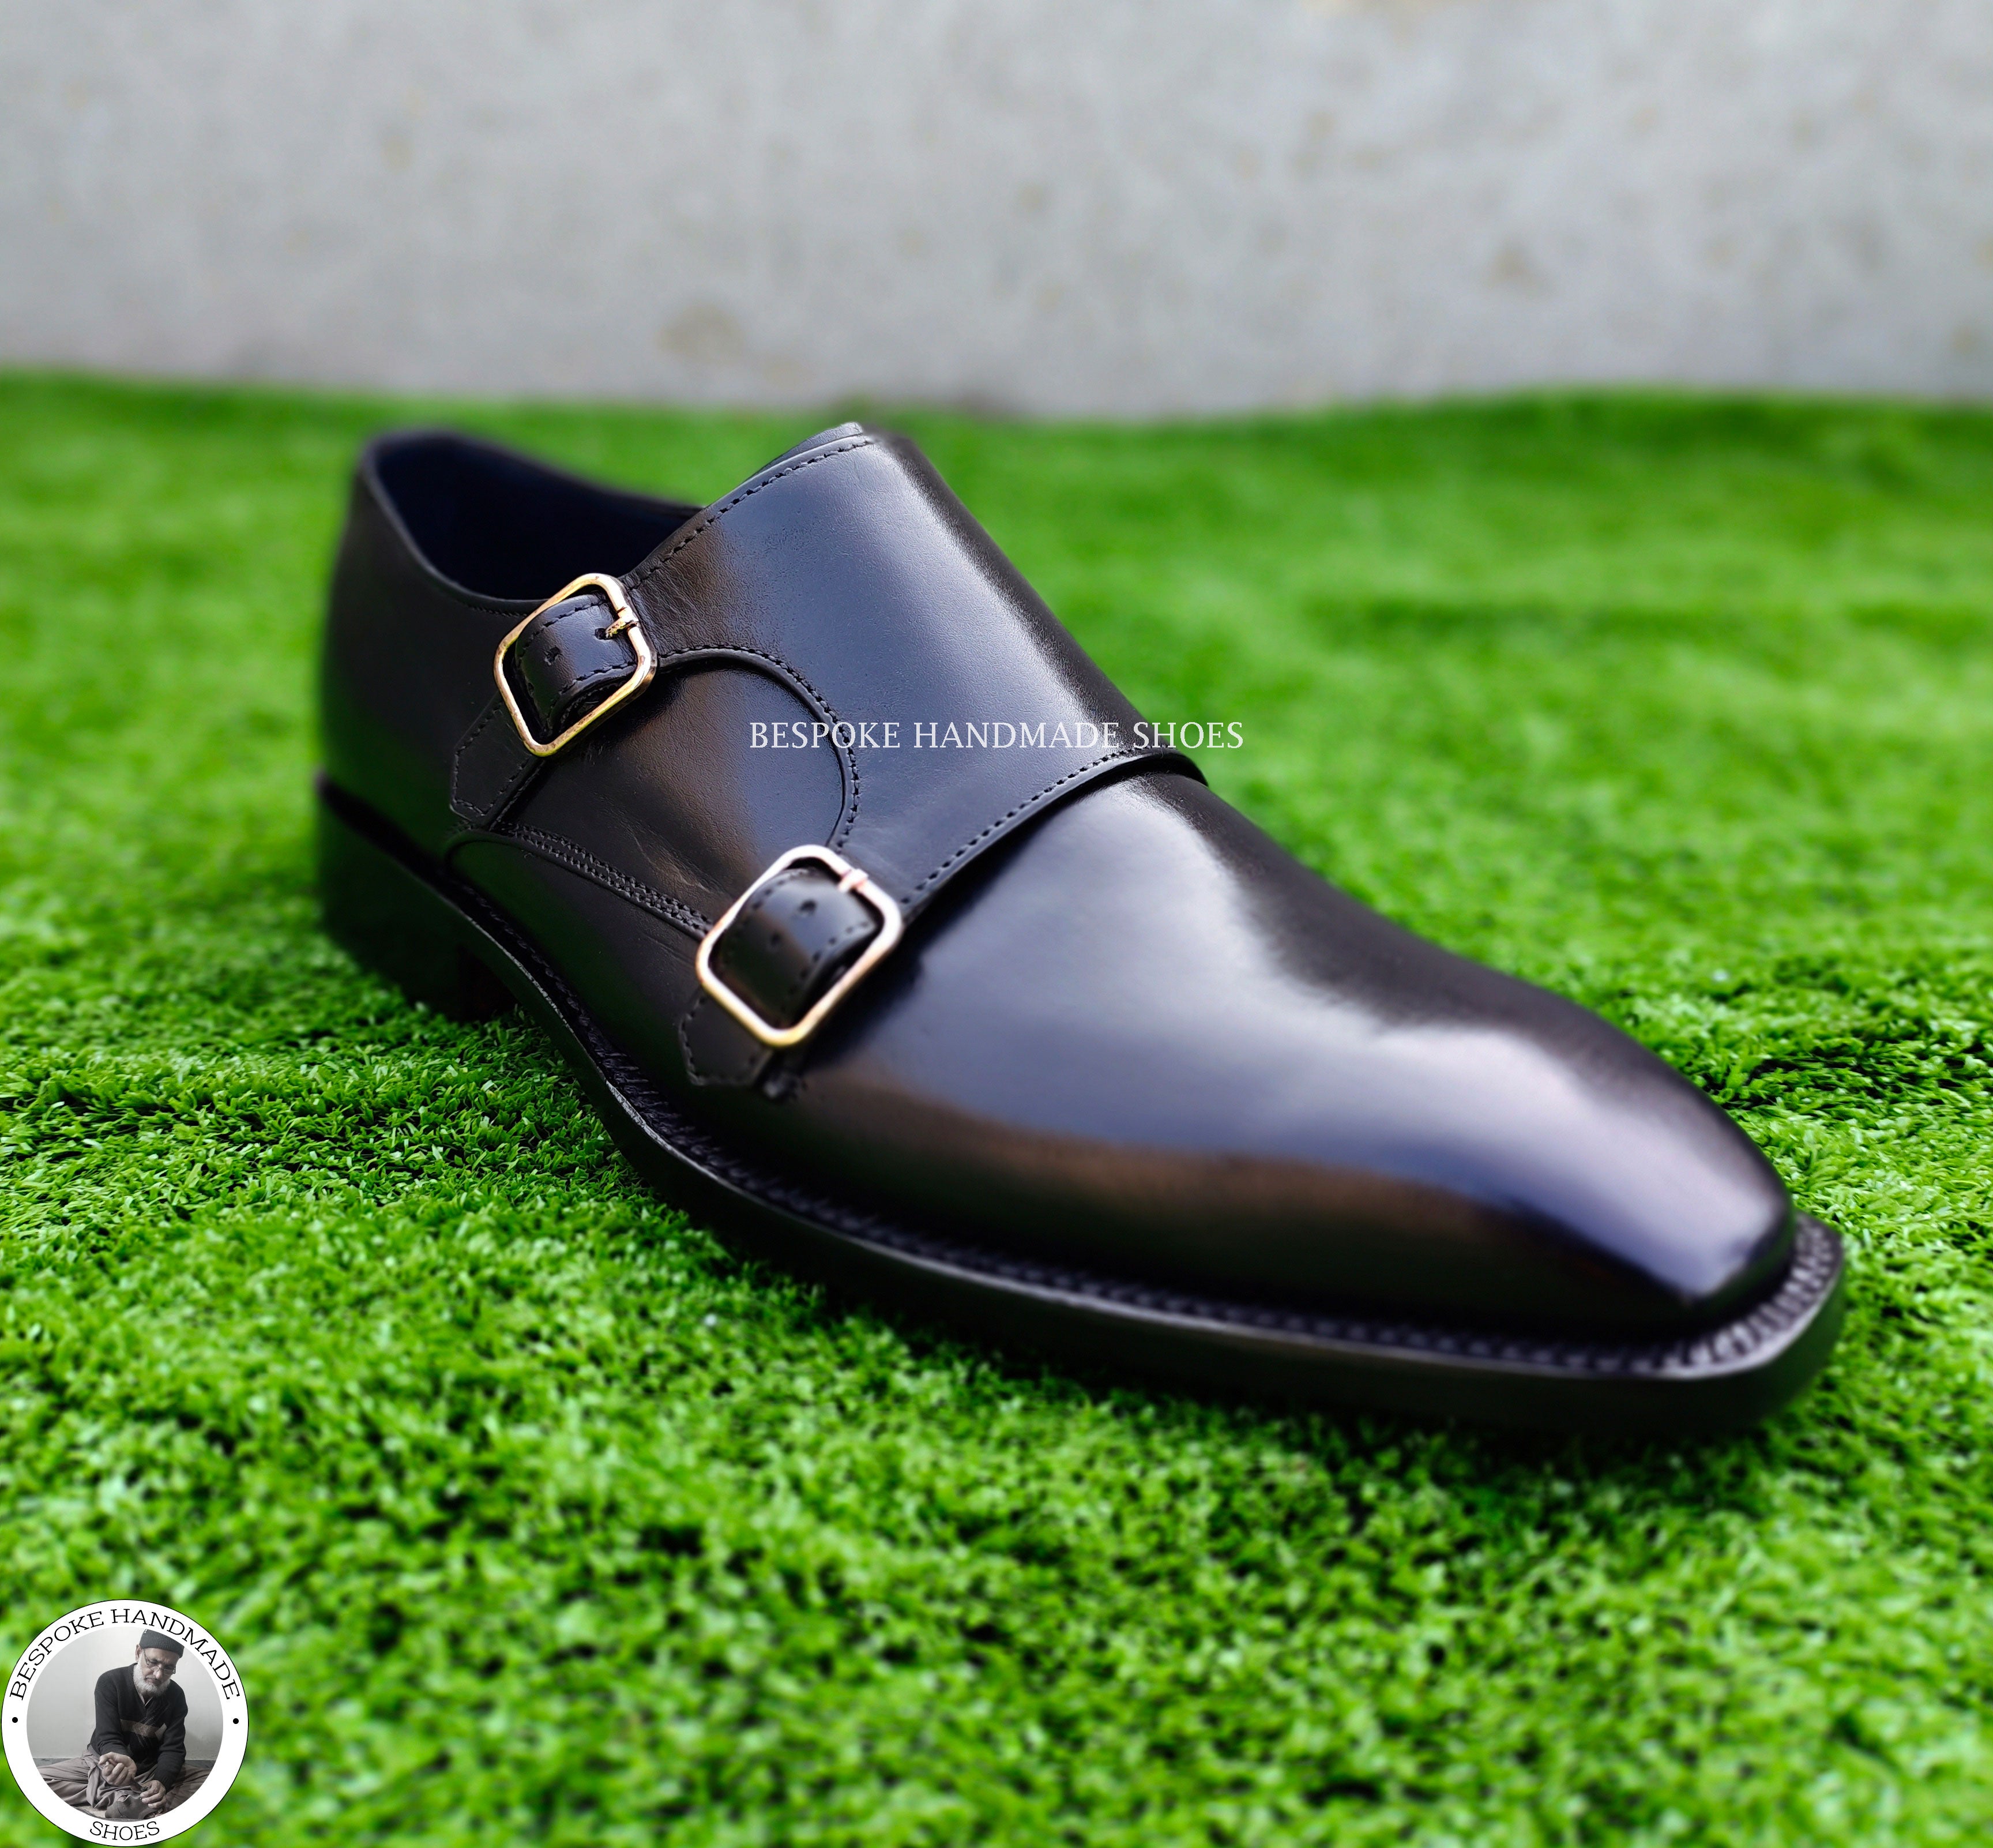 Handmade Bespoke Genuine Black Leather Double Monk Strap Wholecut Casual Shoes For Men's